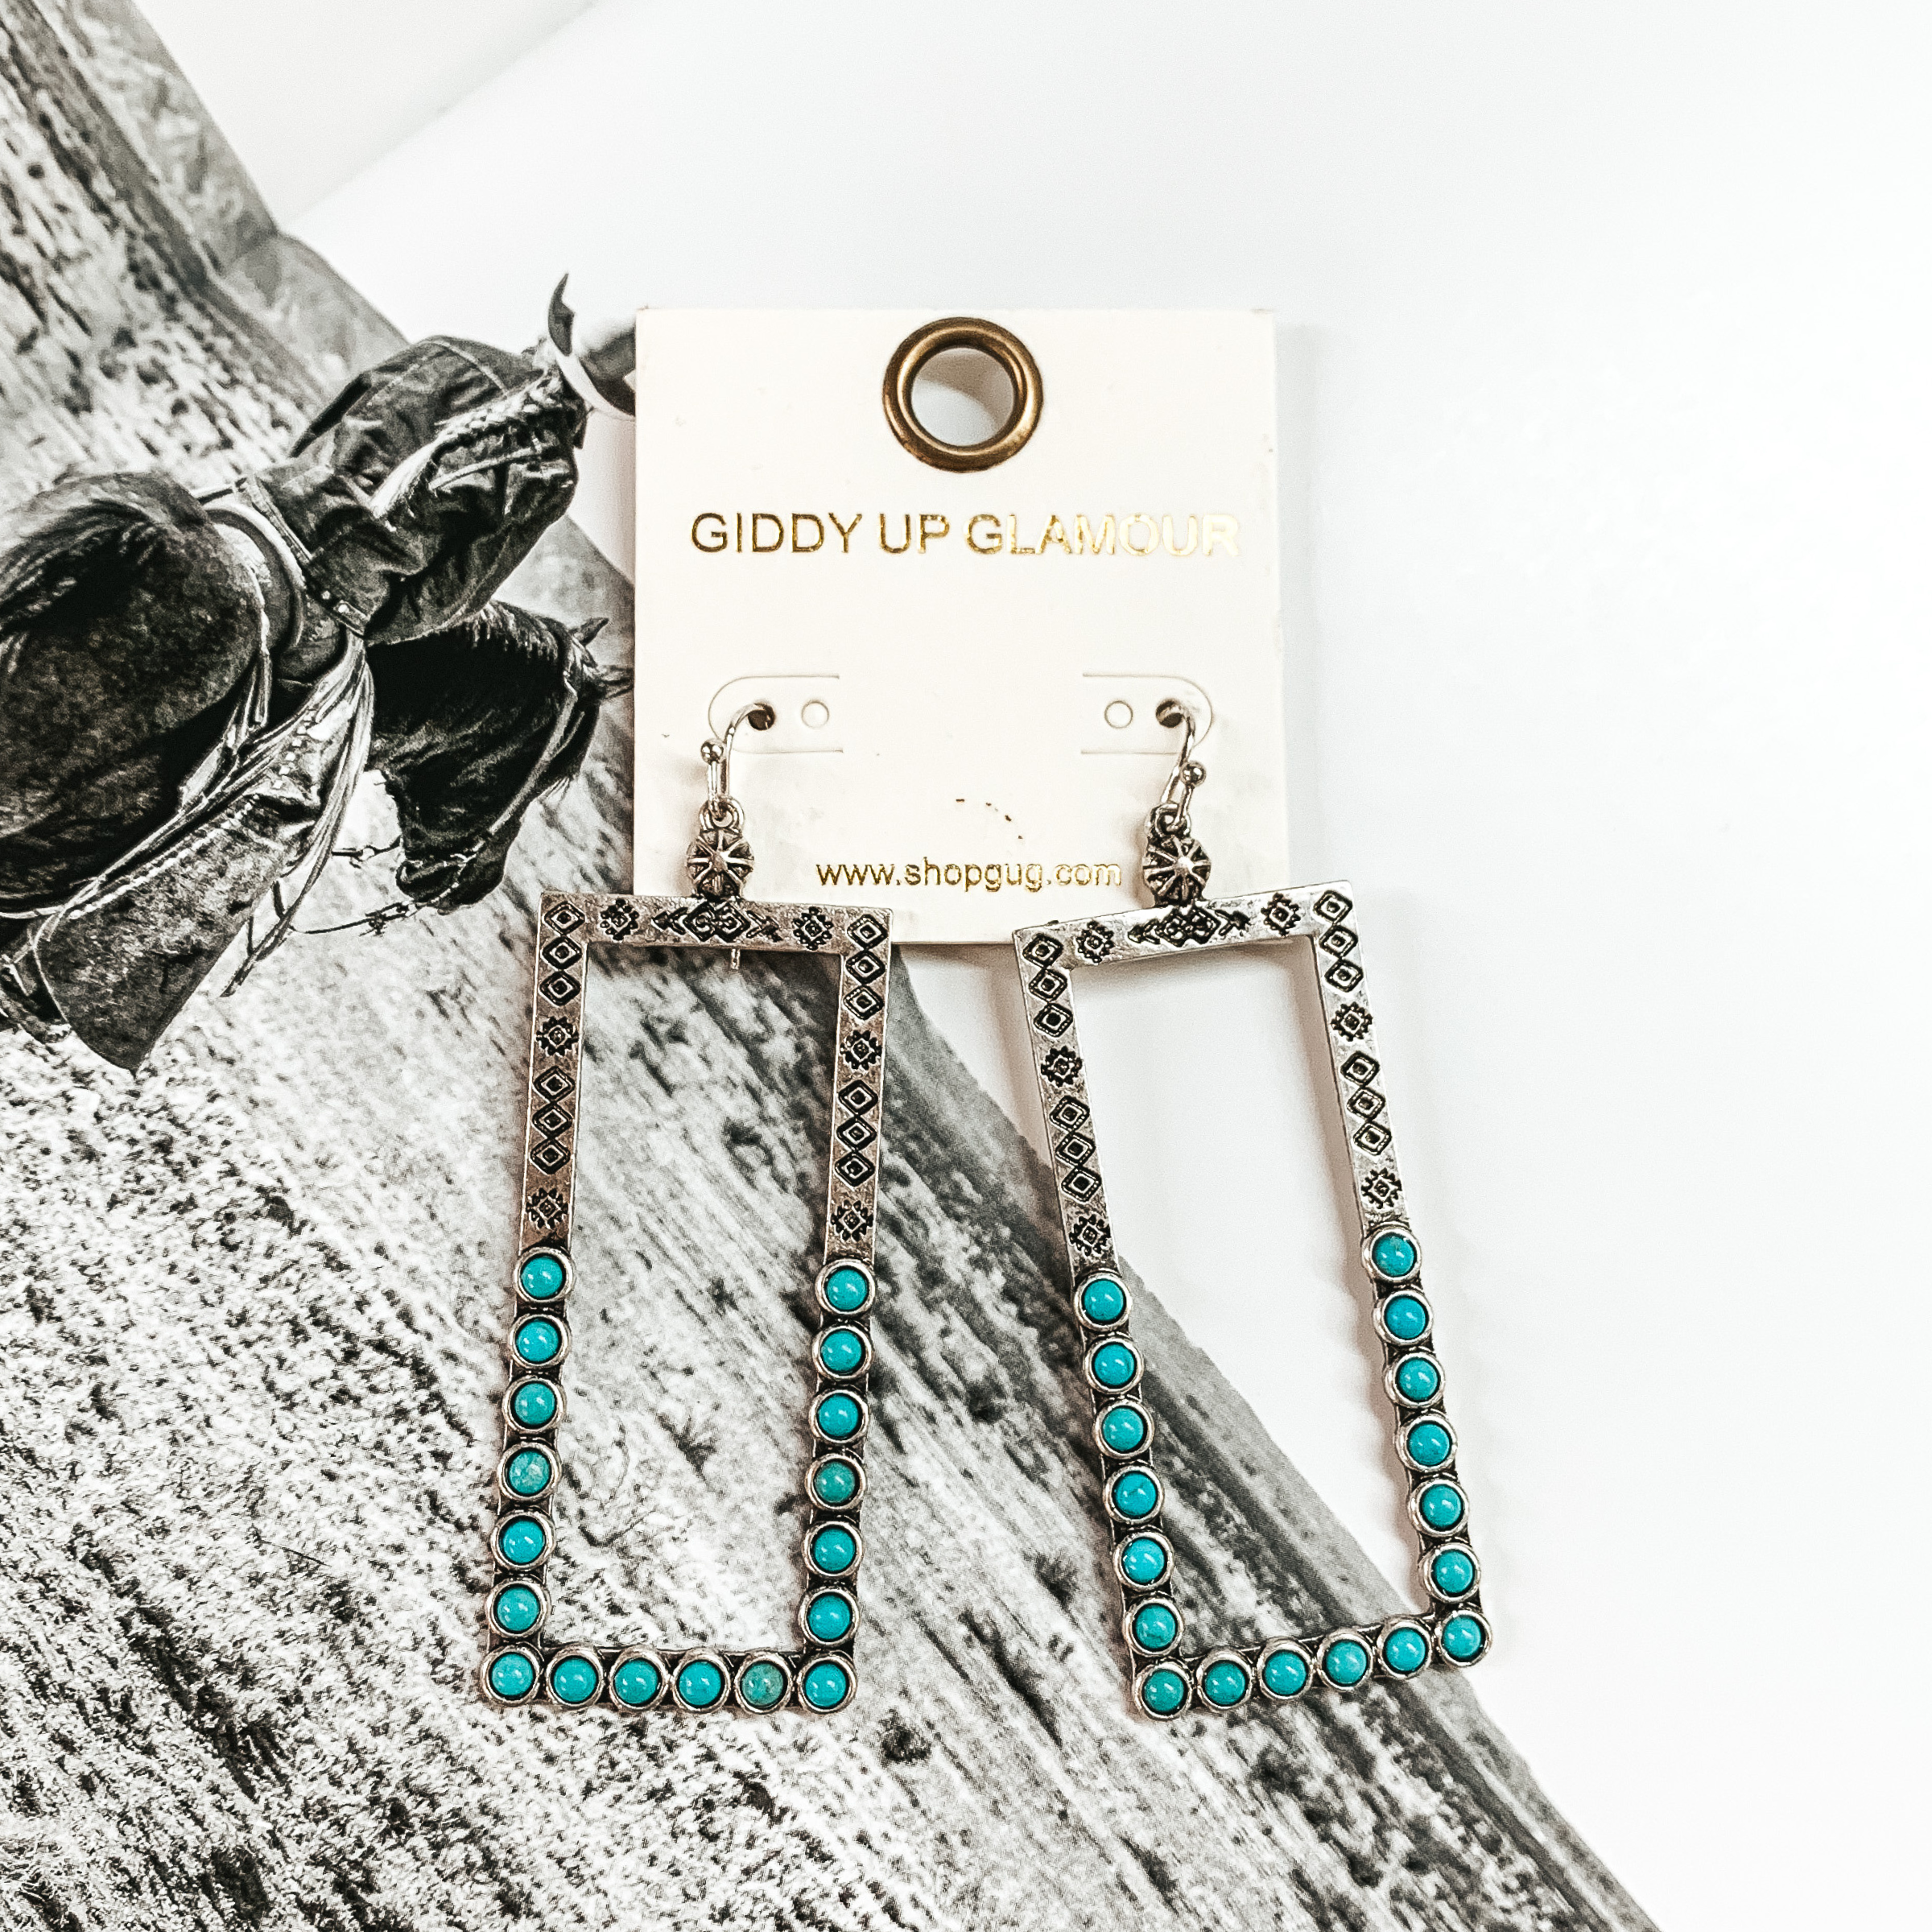 Silver, open rectangle dangle earrings. These earrings include engraving on the top half and turquoise stones on the bottom half. These earrings are pictured on a black and white picture.